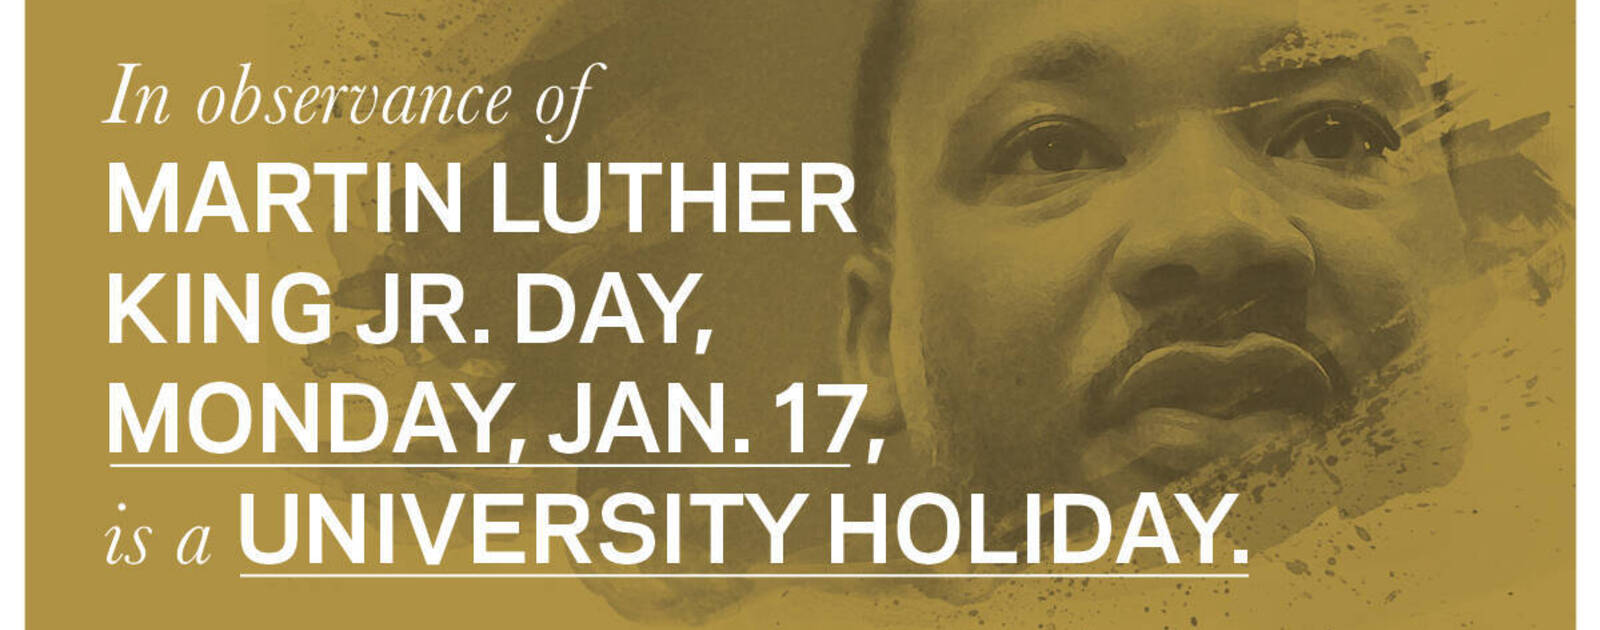 Martin Luther King Jr. Holiday Observance 2022 Latest NDWorks